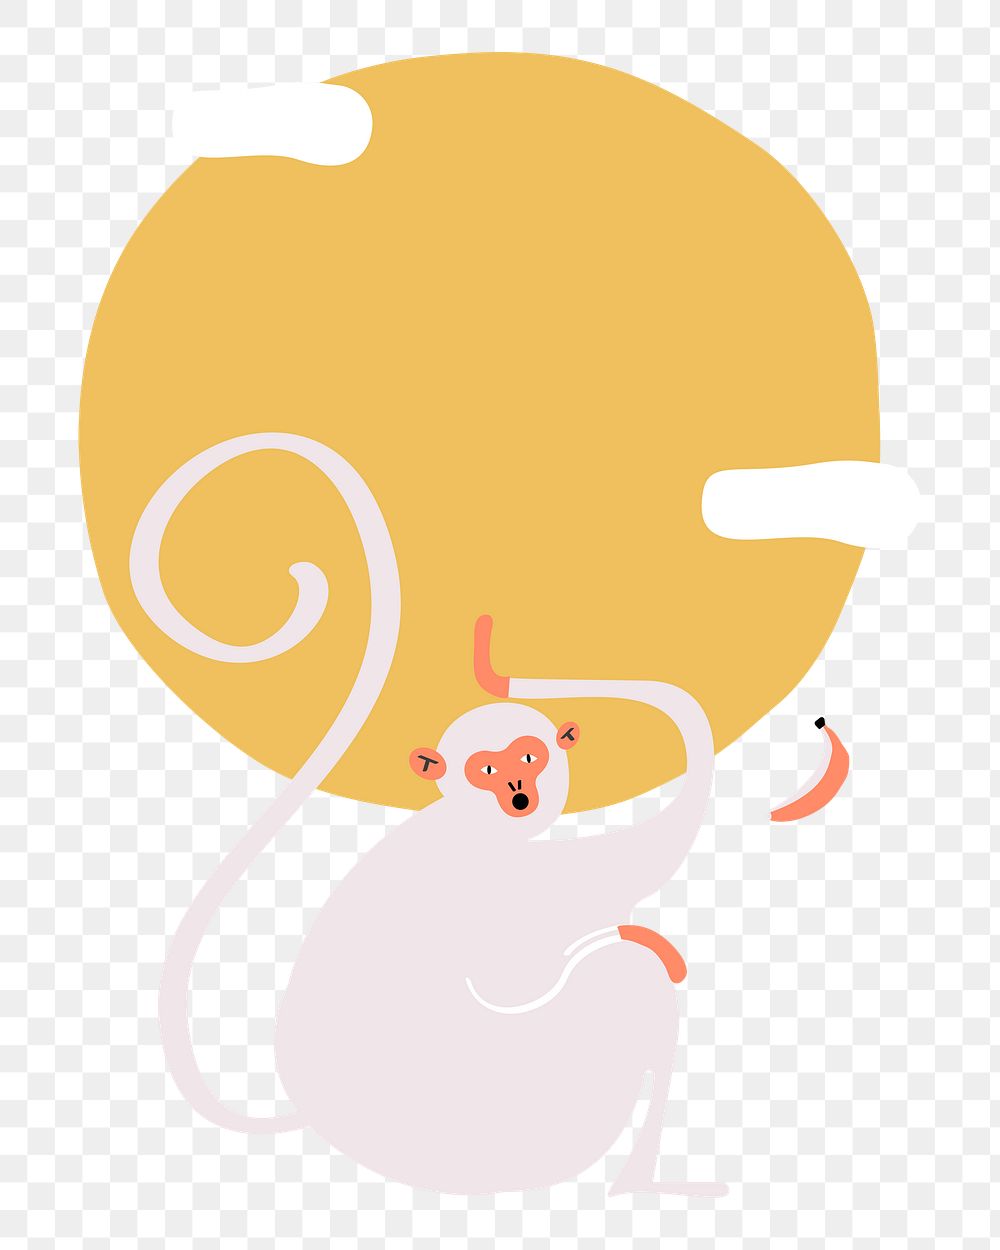 Png Year of the monkey element, transparent background